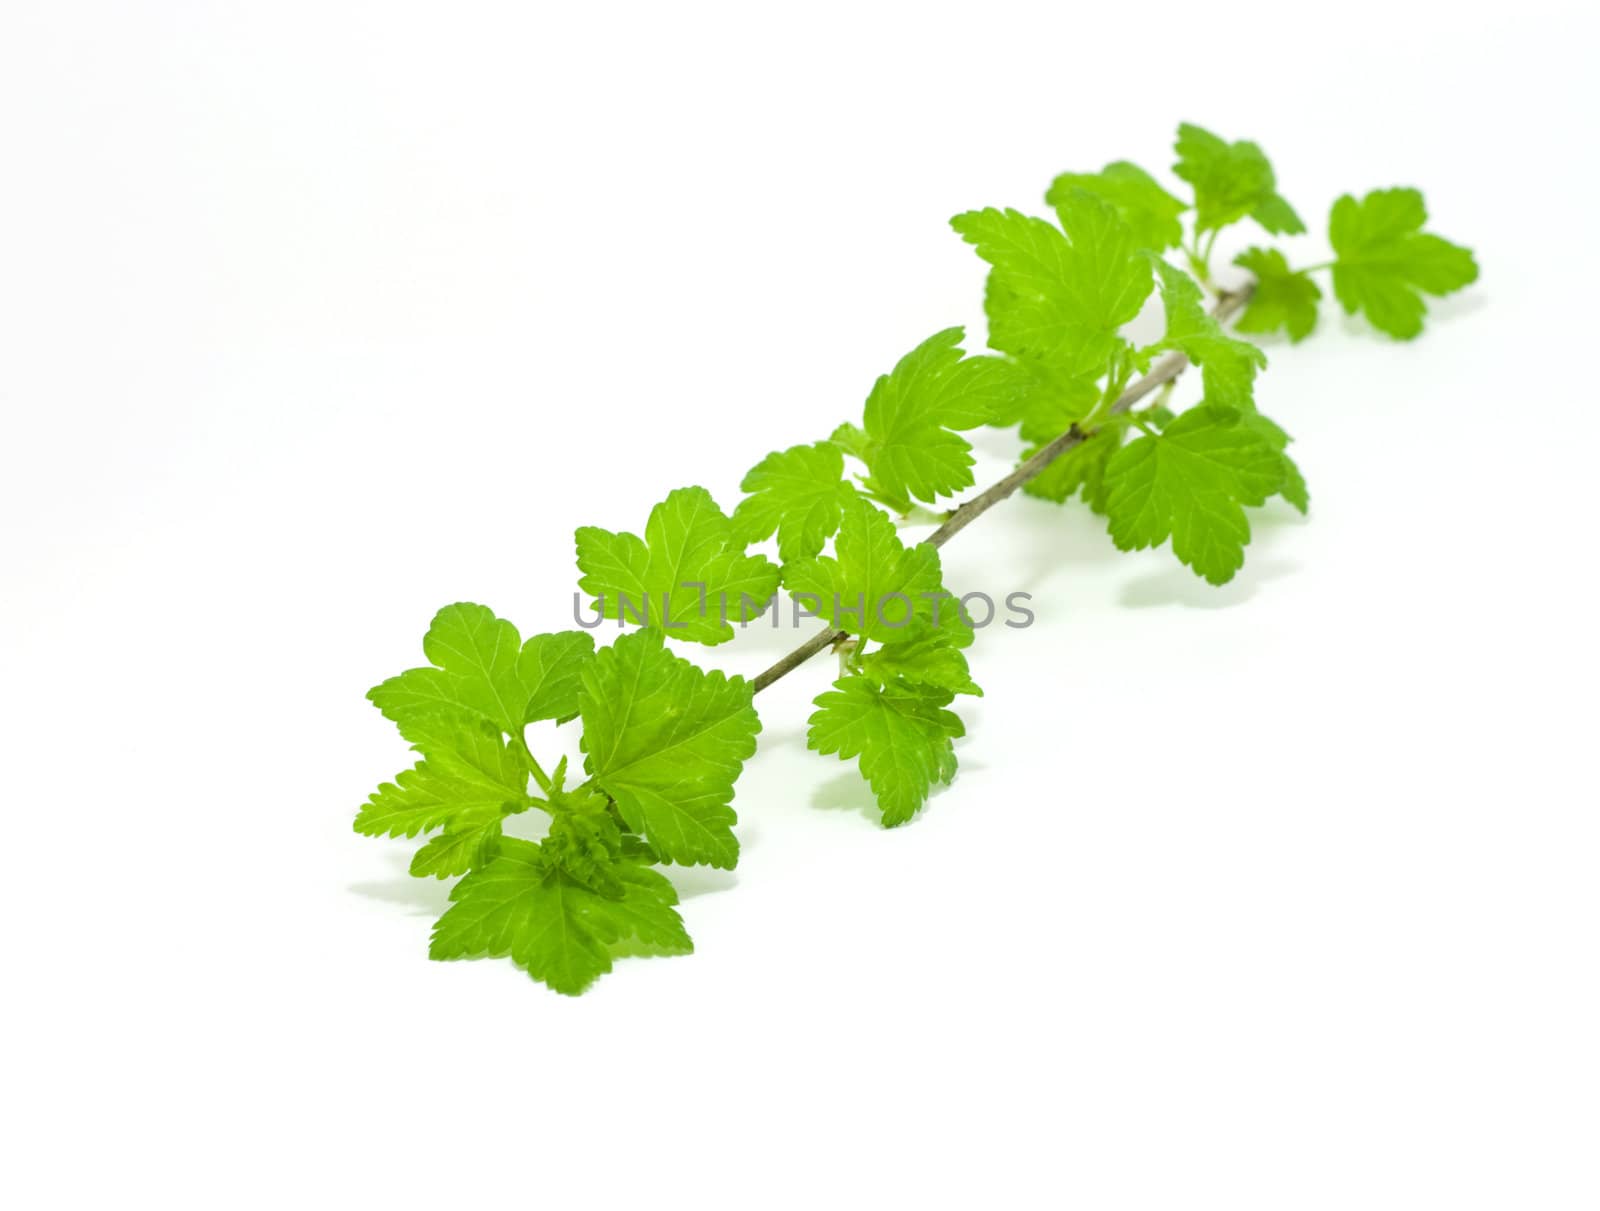 Black currant leaves isolated on white by ursolv